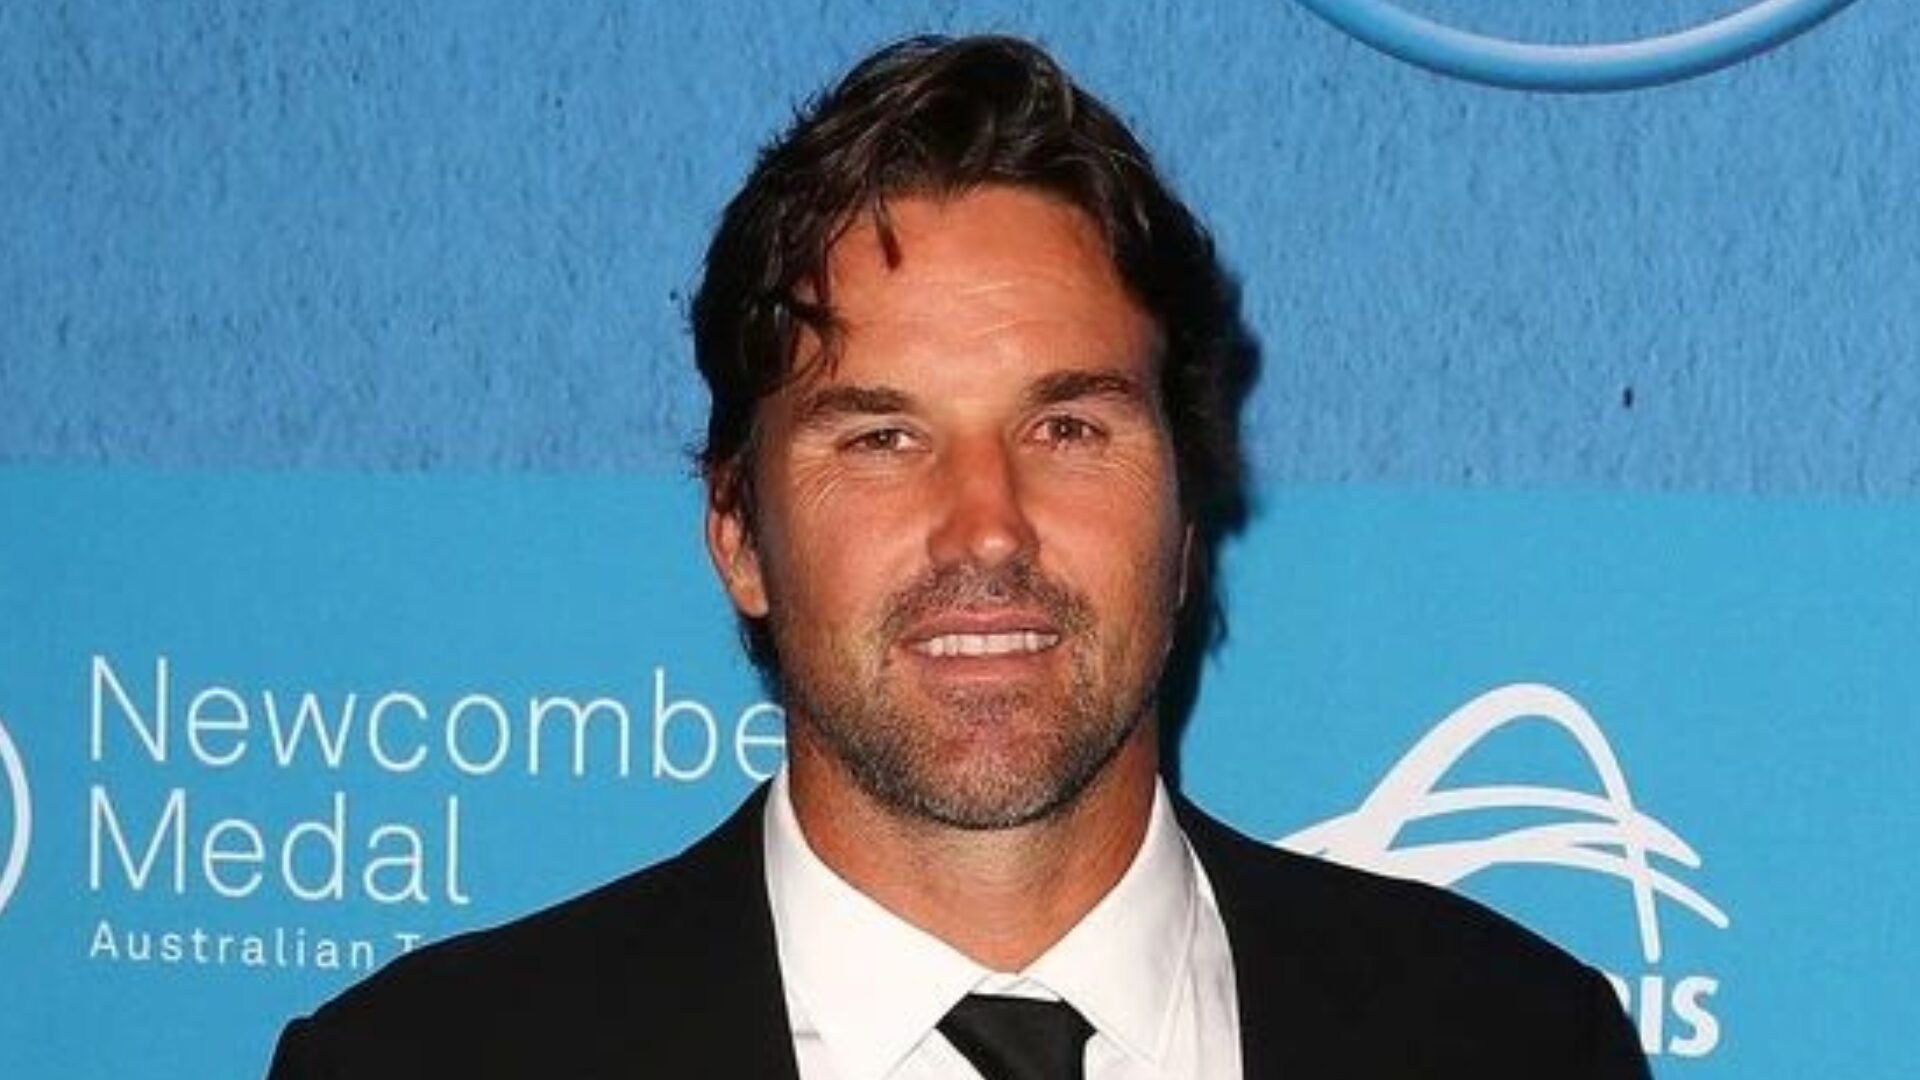 FIP Promotion Melbourne – Pat Rafter ready for his second tournament in a row